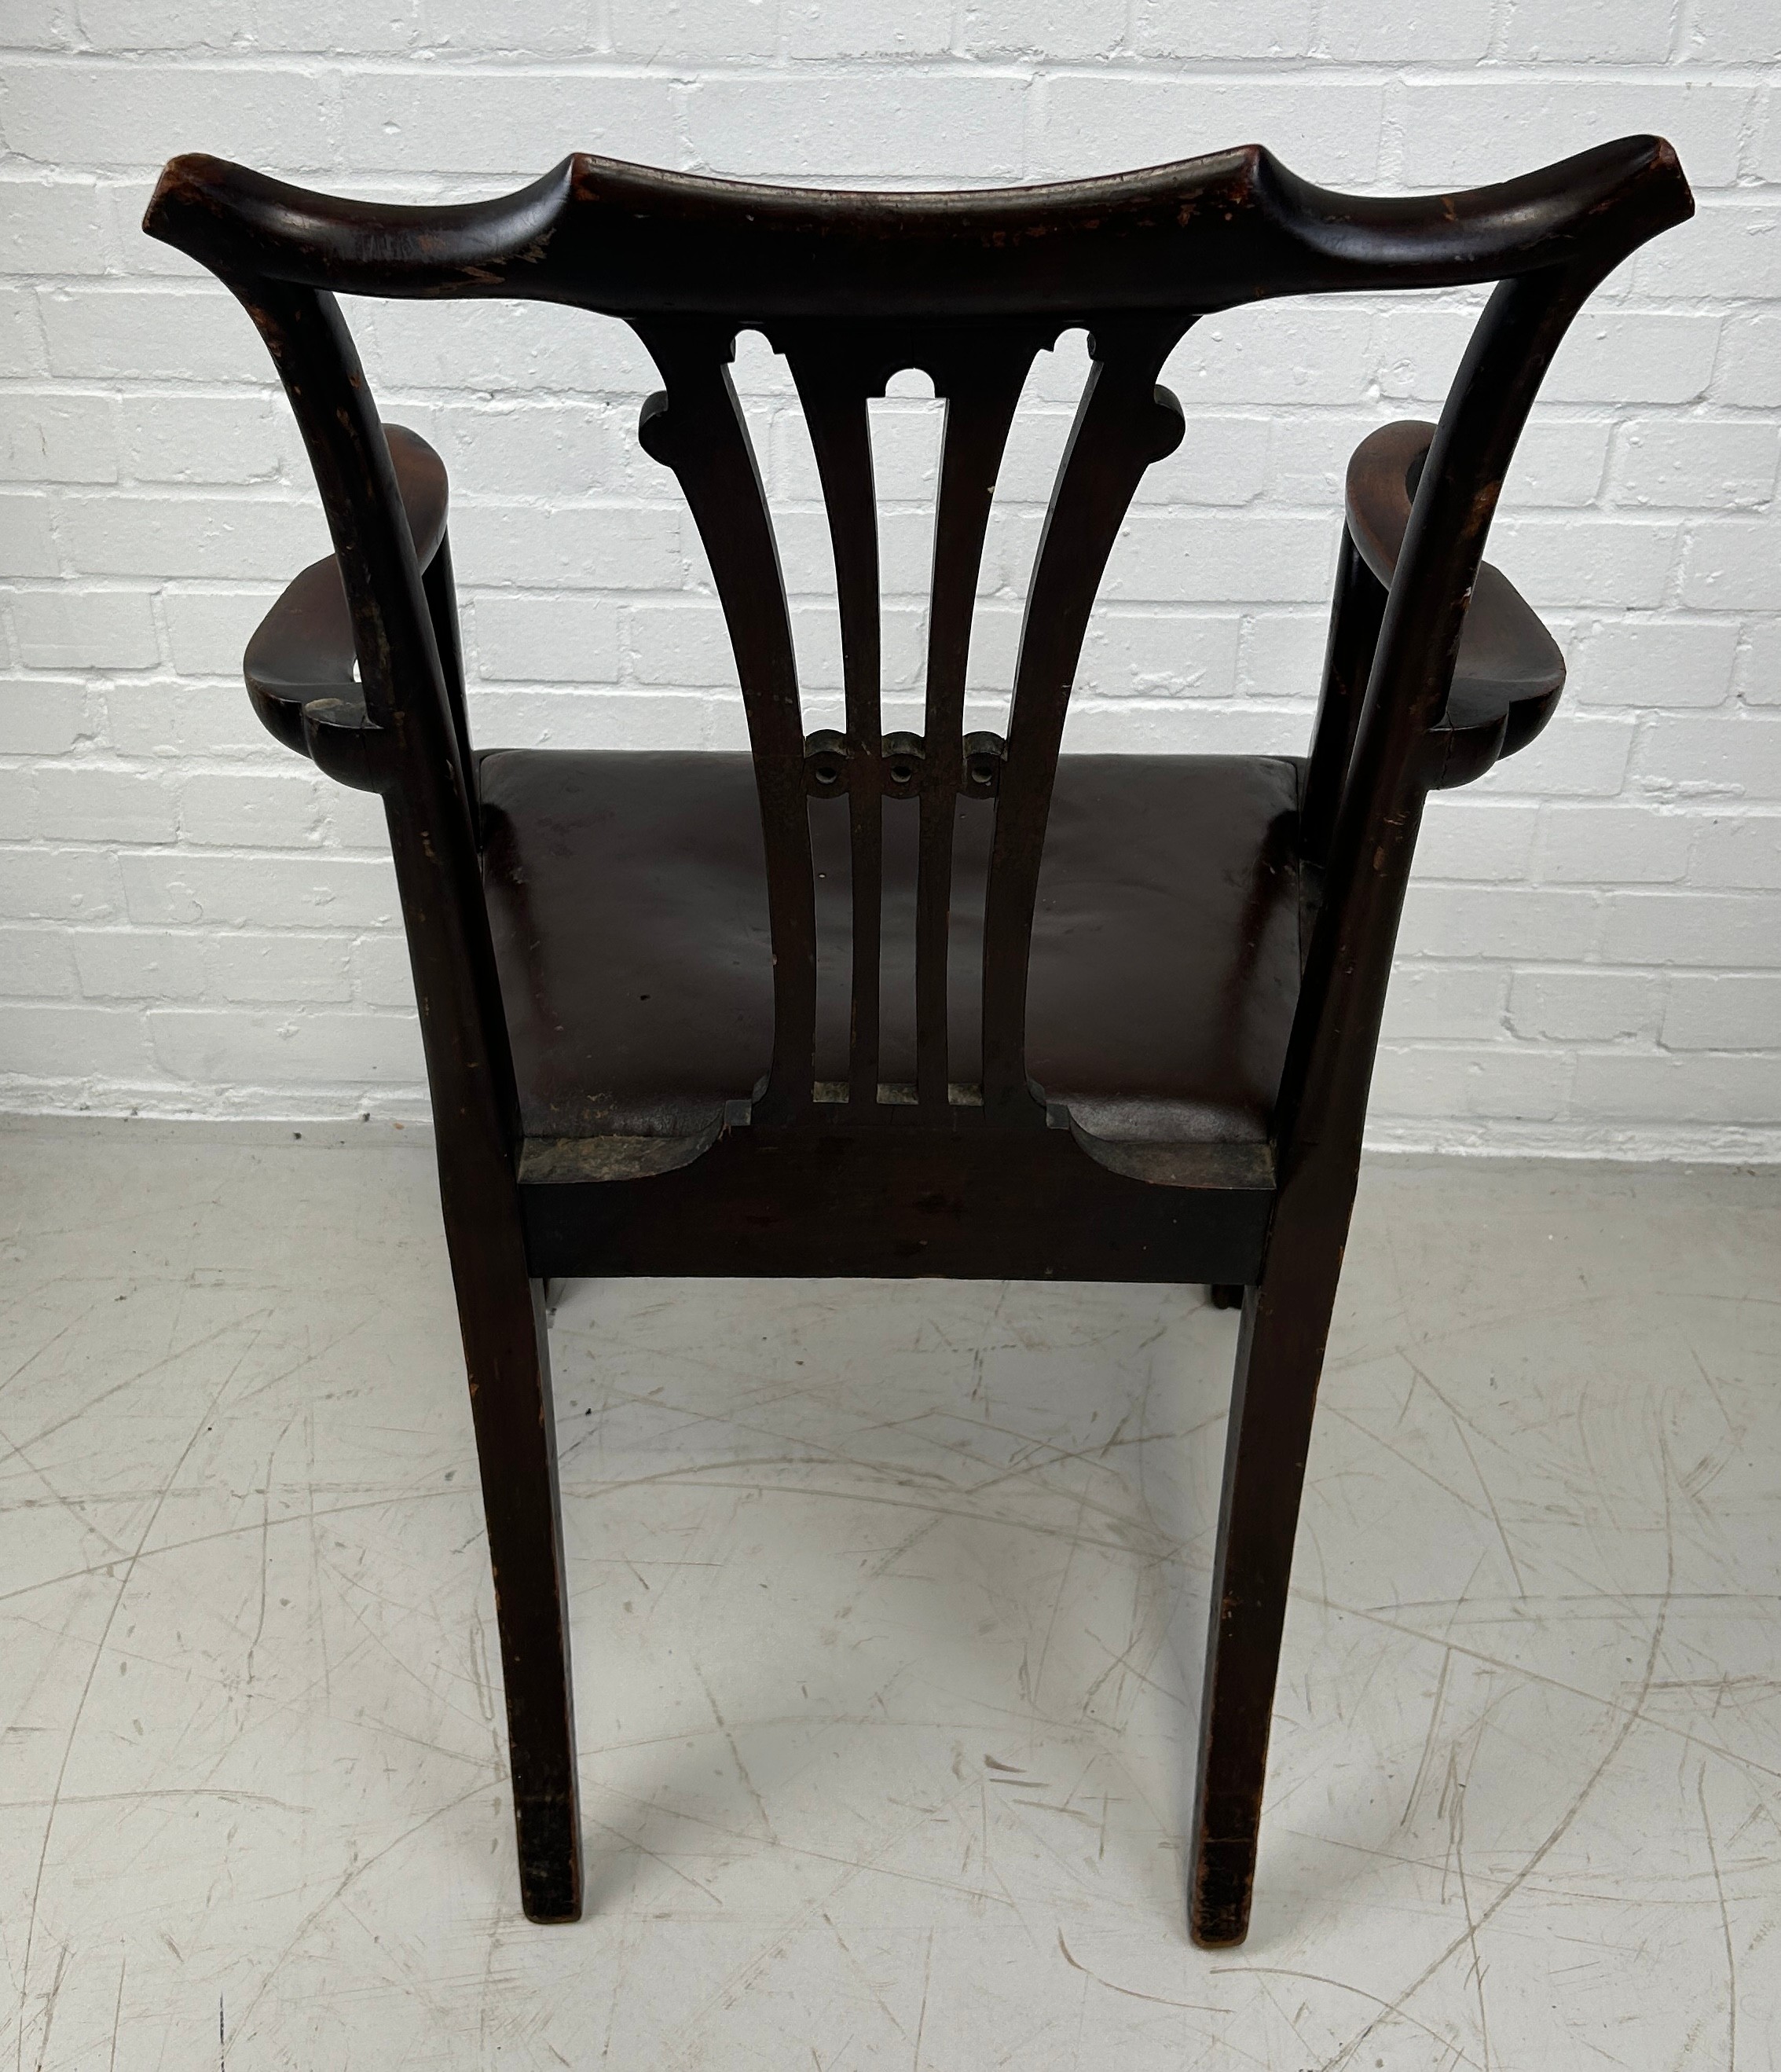 A CHIPPENDALE DESIGN DESK CHAIR WITH BROWN LEATHER SEAT AND CLAW AND BALL FEET, 96cm x 60cm x 46cm - Image 3 of 3